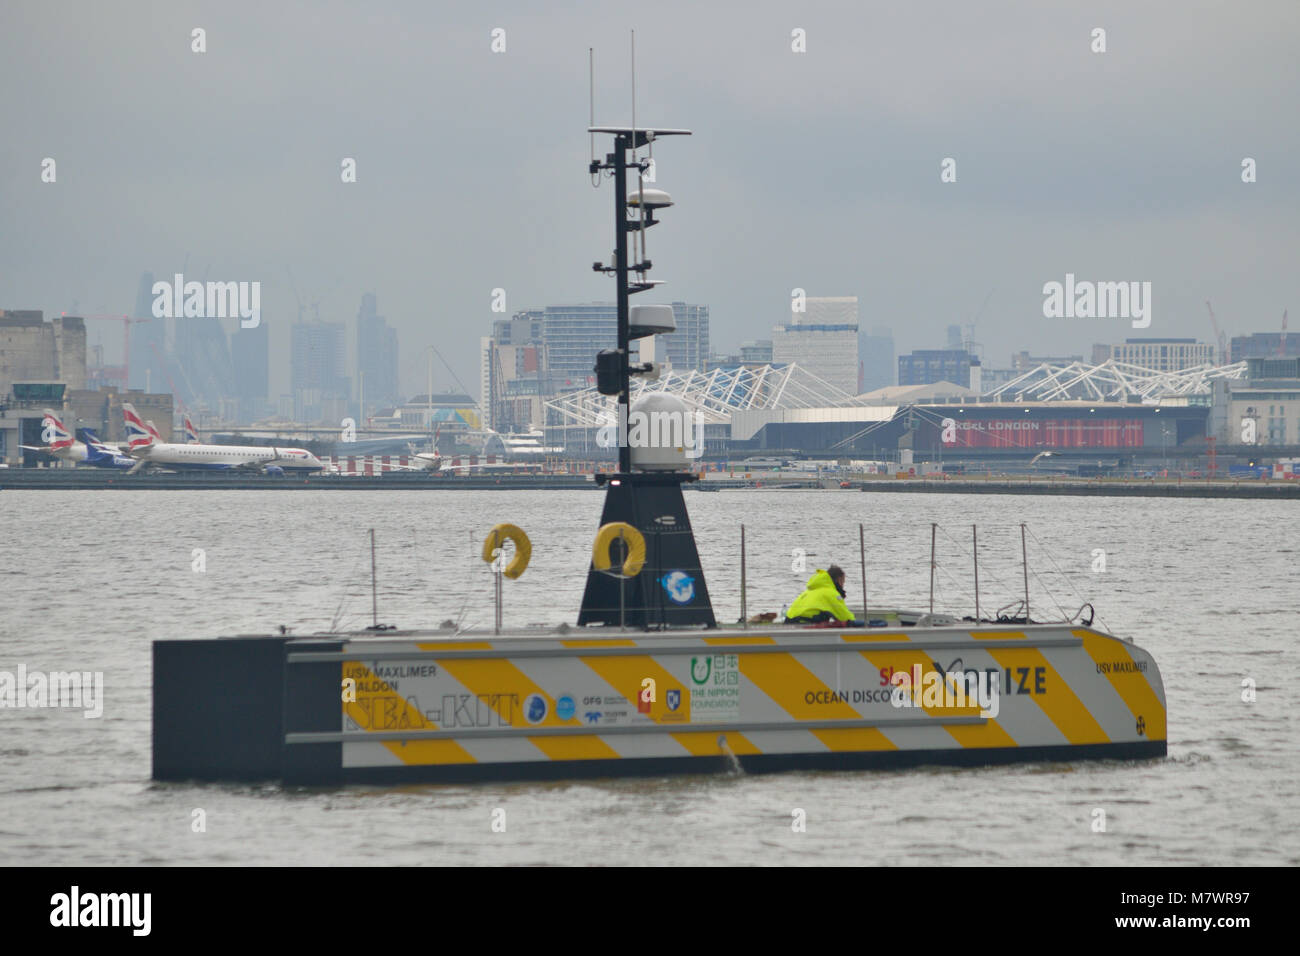 USV Maxlimer is a long-endurance Unmanned Surface Vessel and is one of the shortlisted contenders for the Shell Ocean Discovery XPRIZE Stock Photo